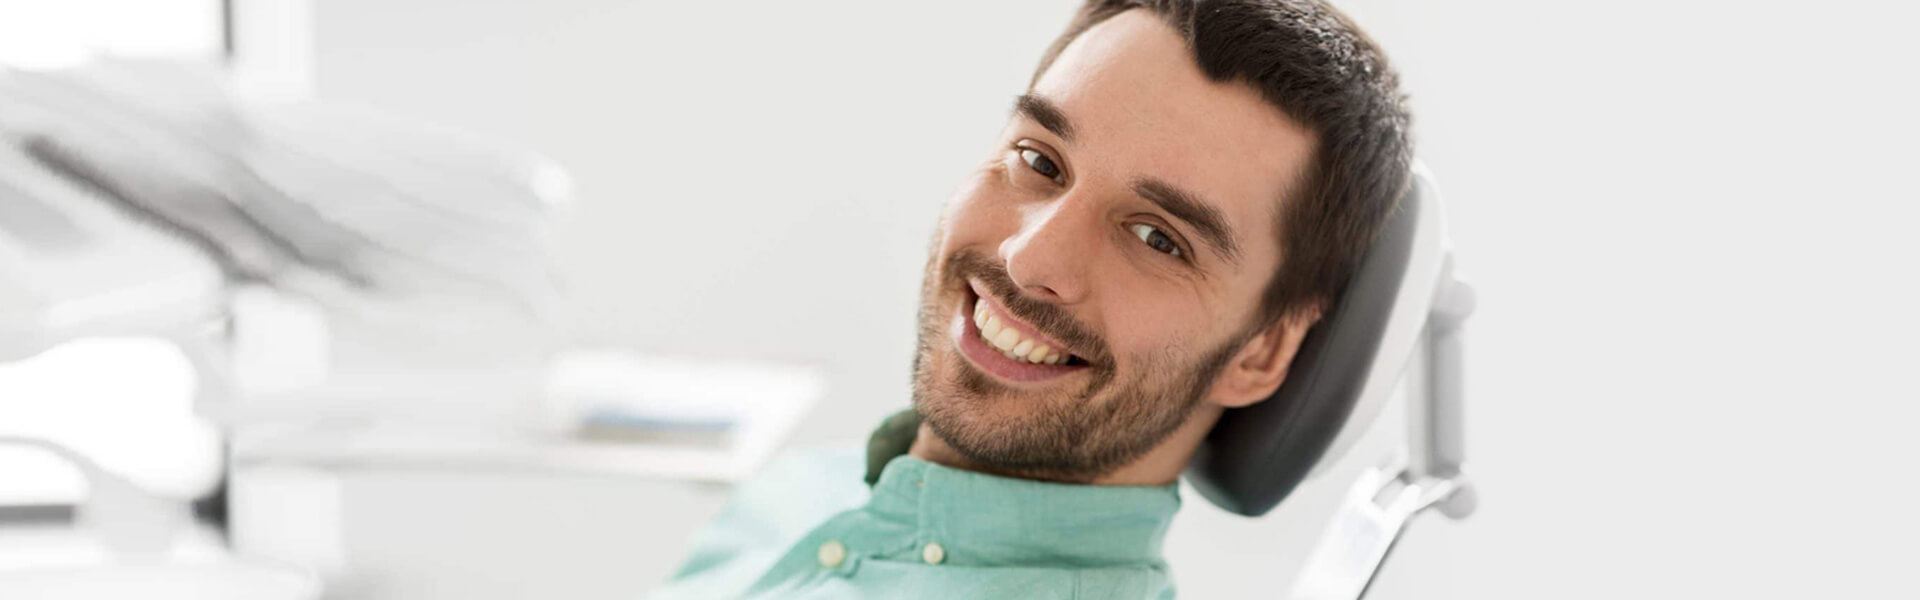 Root Canals in Brampton, ON